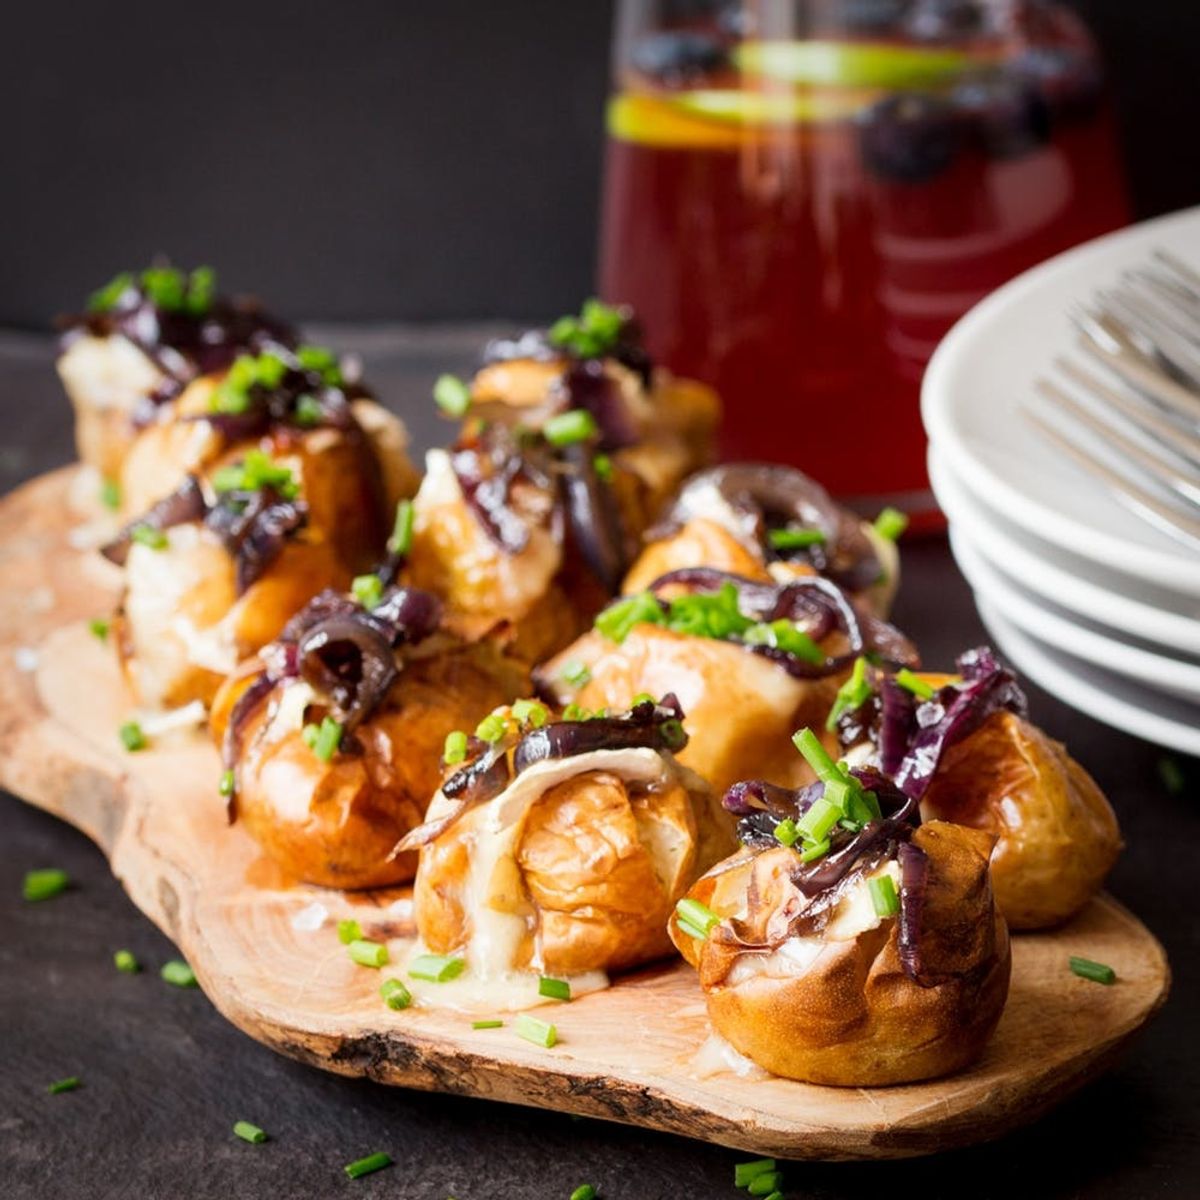 How to Make Mini Baked Potatoes for Your Next Summer Shindig